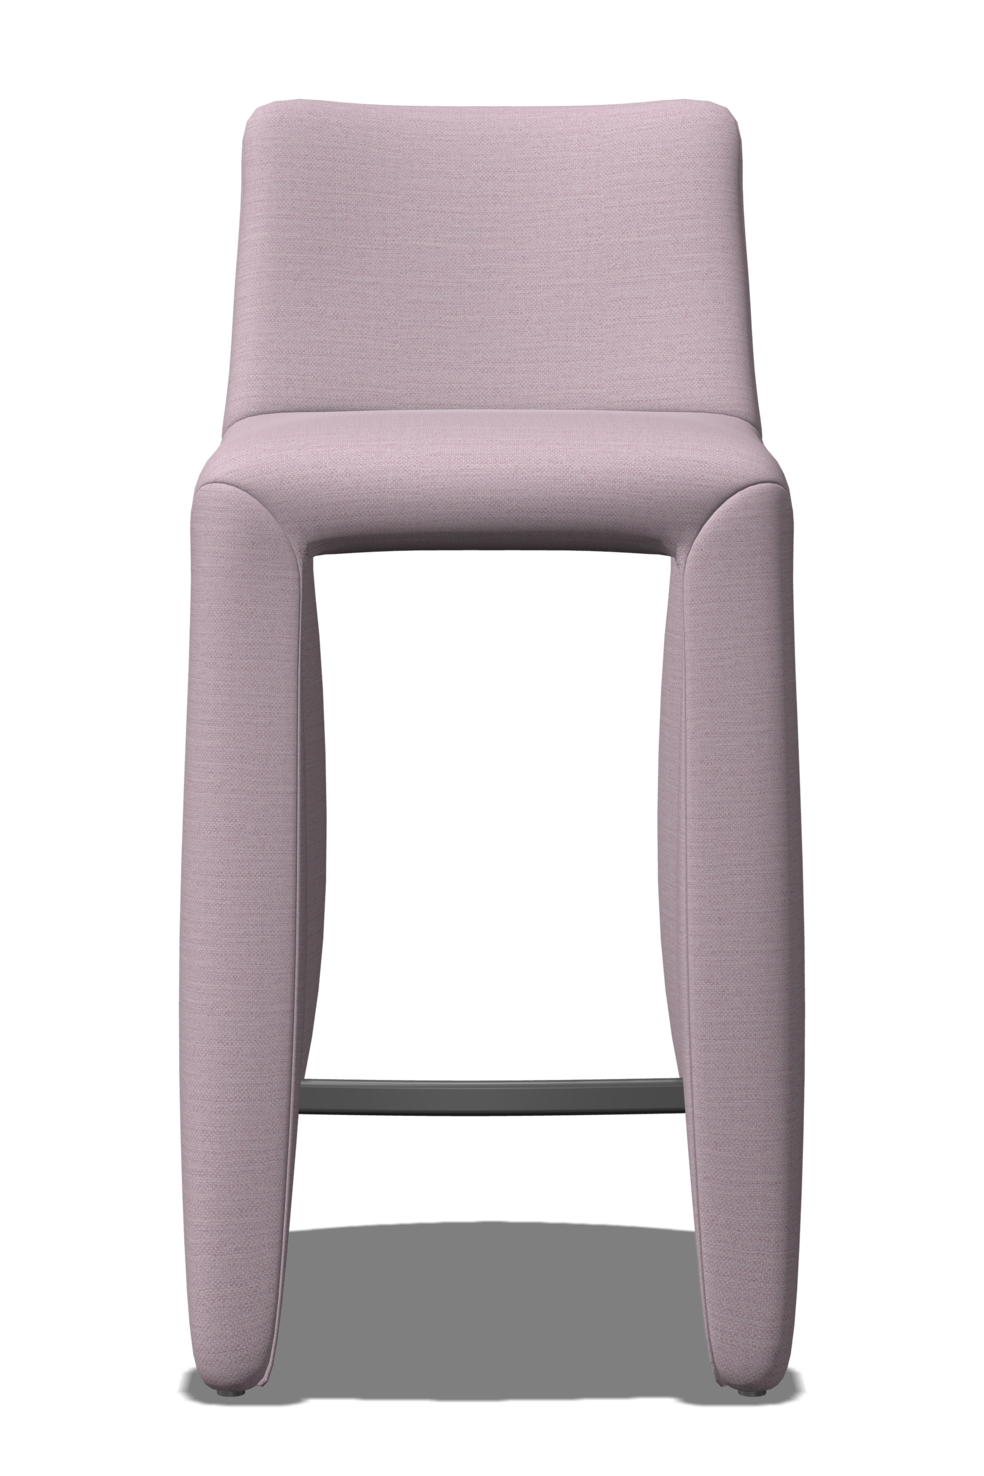 Monster Barstool low no stitching pink